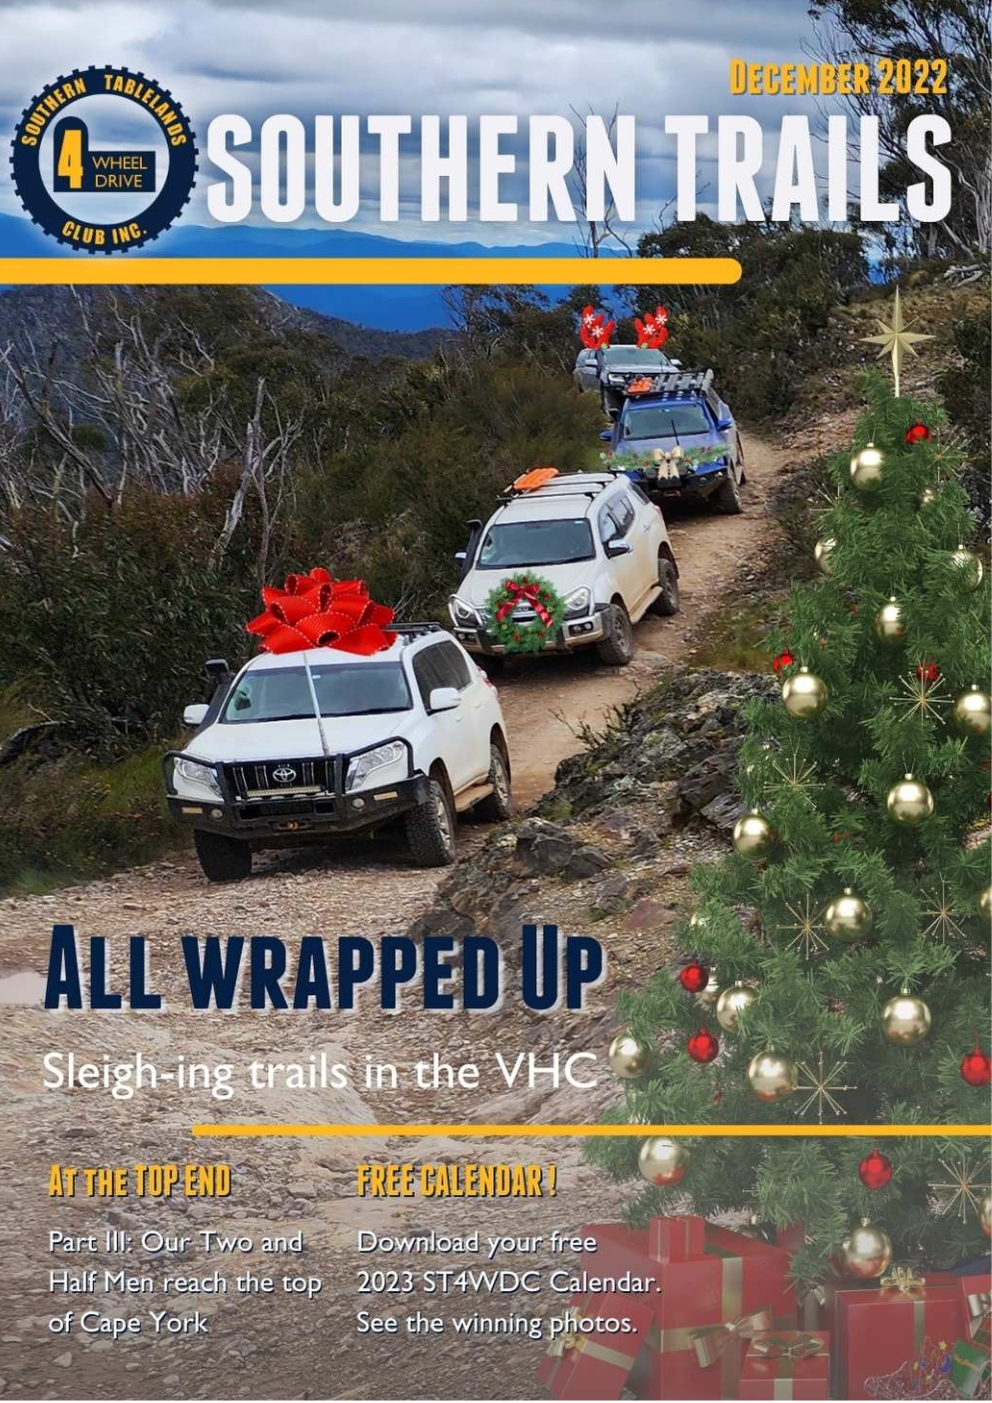 Southern Trails December 2022 Cover